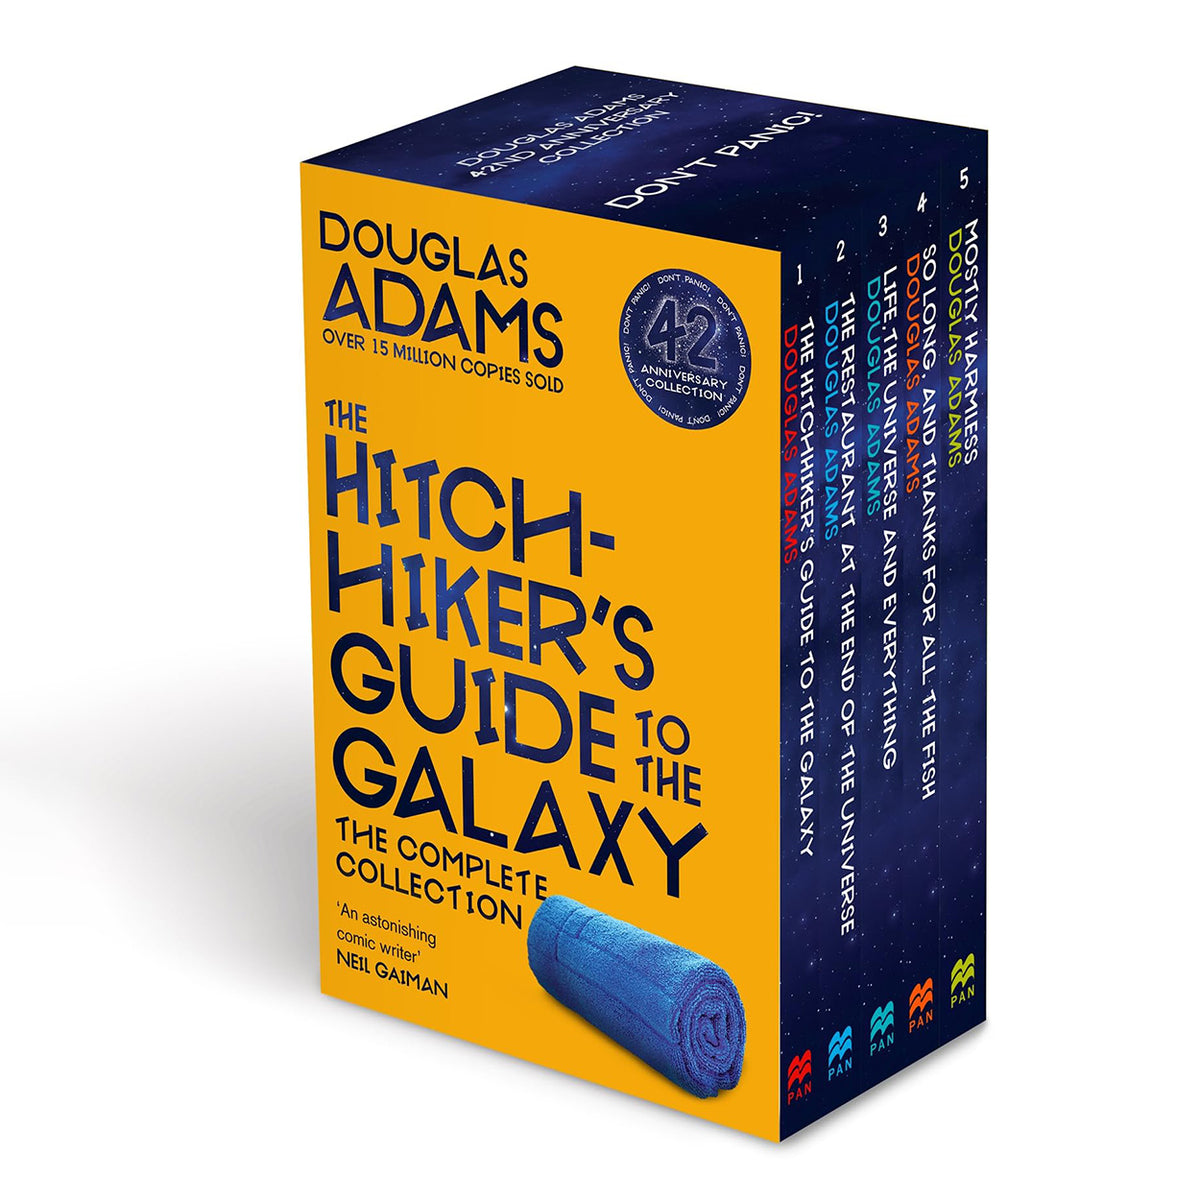 The Complete Hitch-hiker's Guide to the Galaxy Boxset (Paperback)